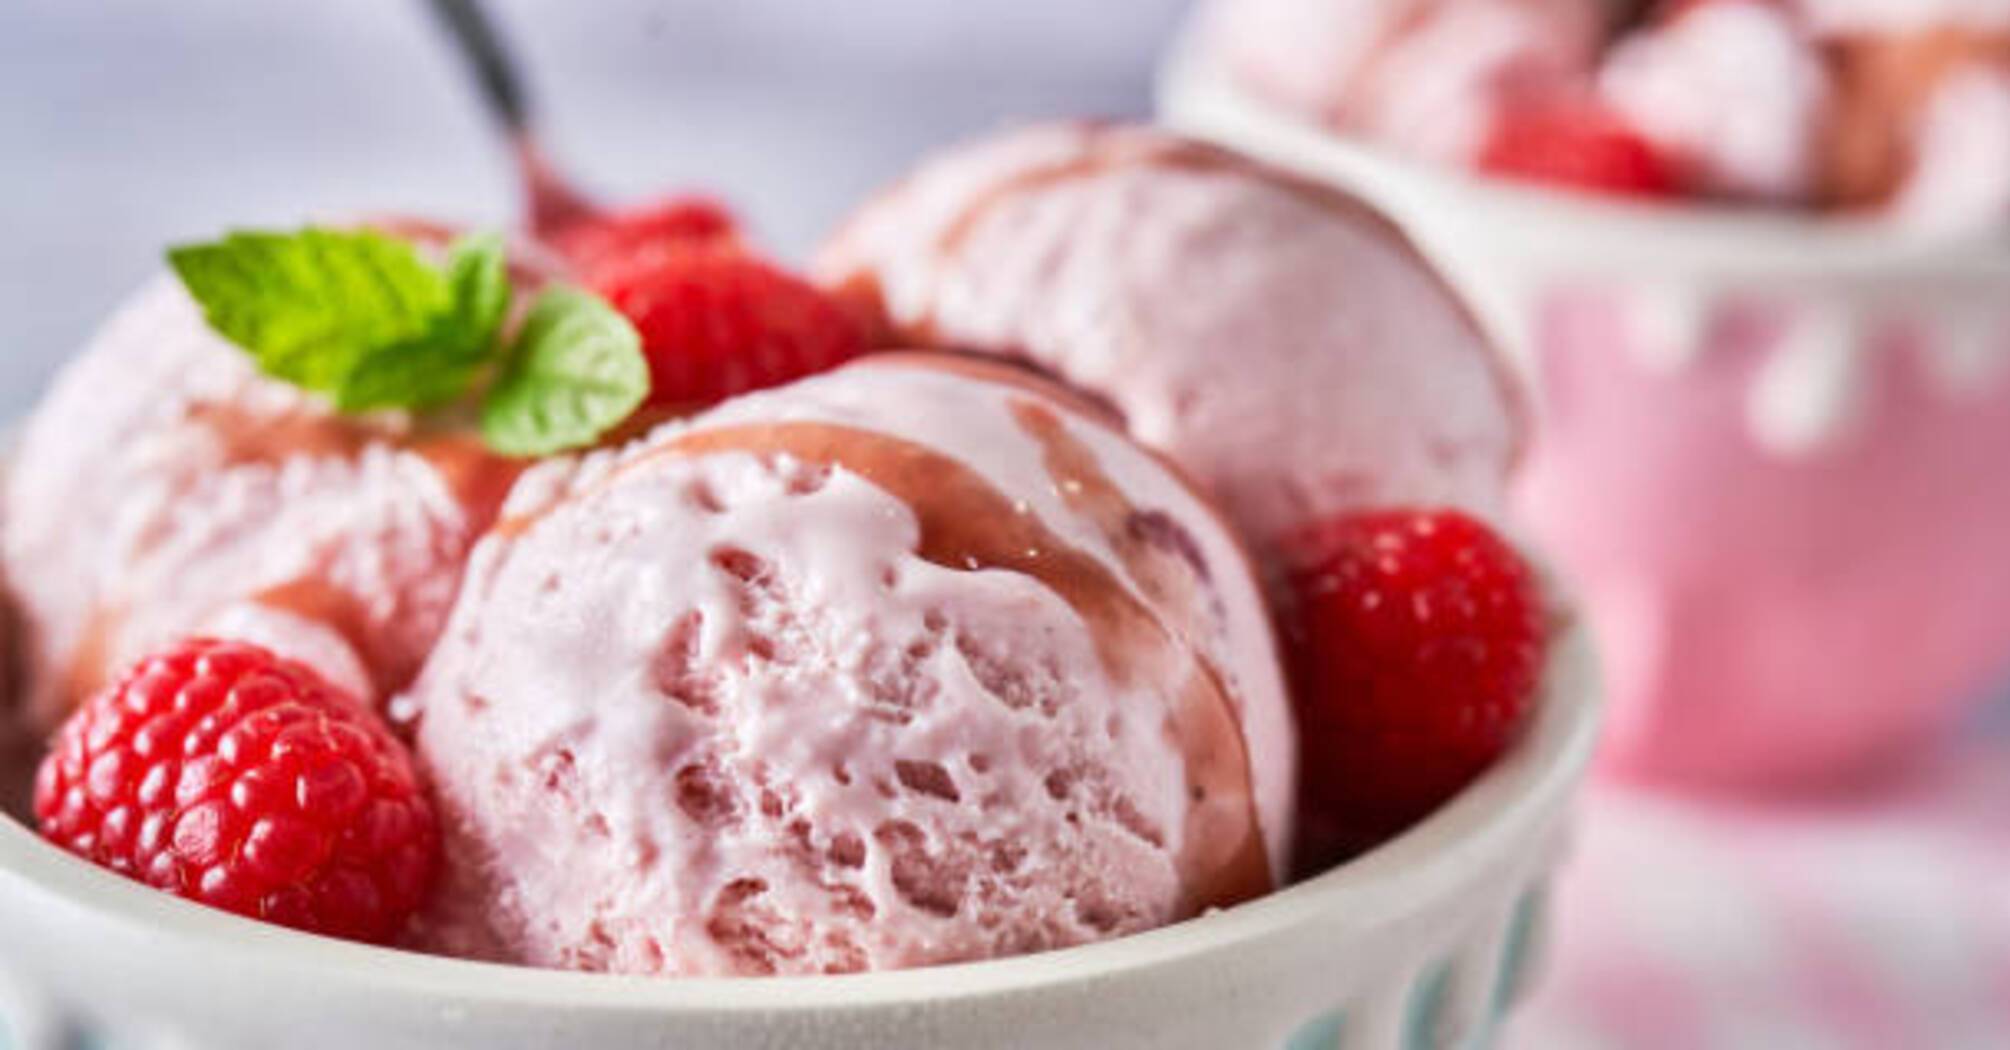 No cream and eggs: how to make low-calorie ice cream in 5 minutes